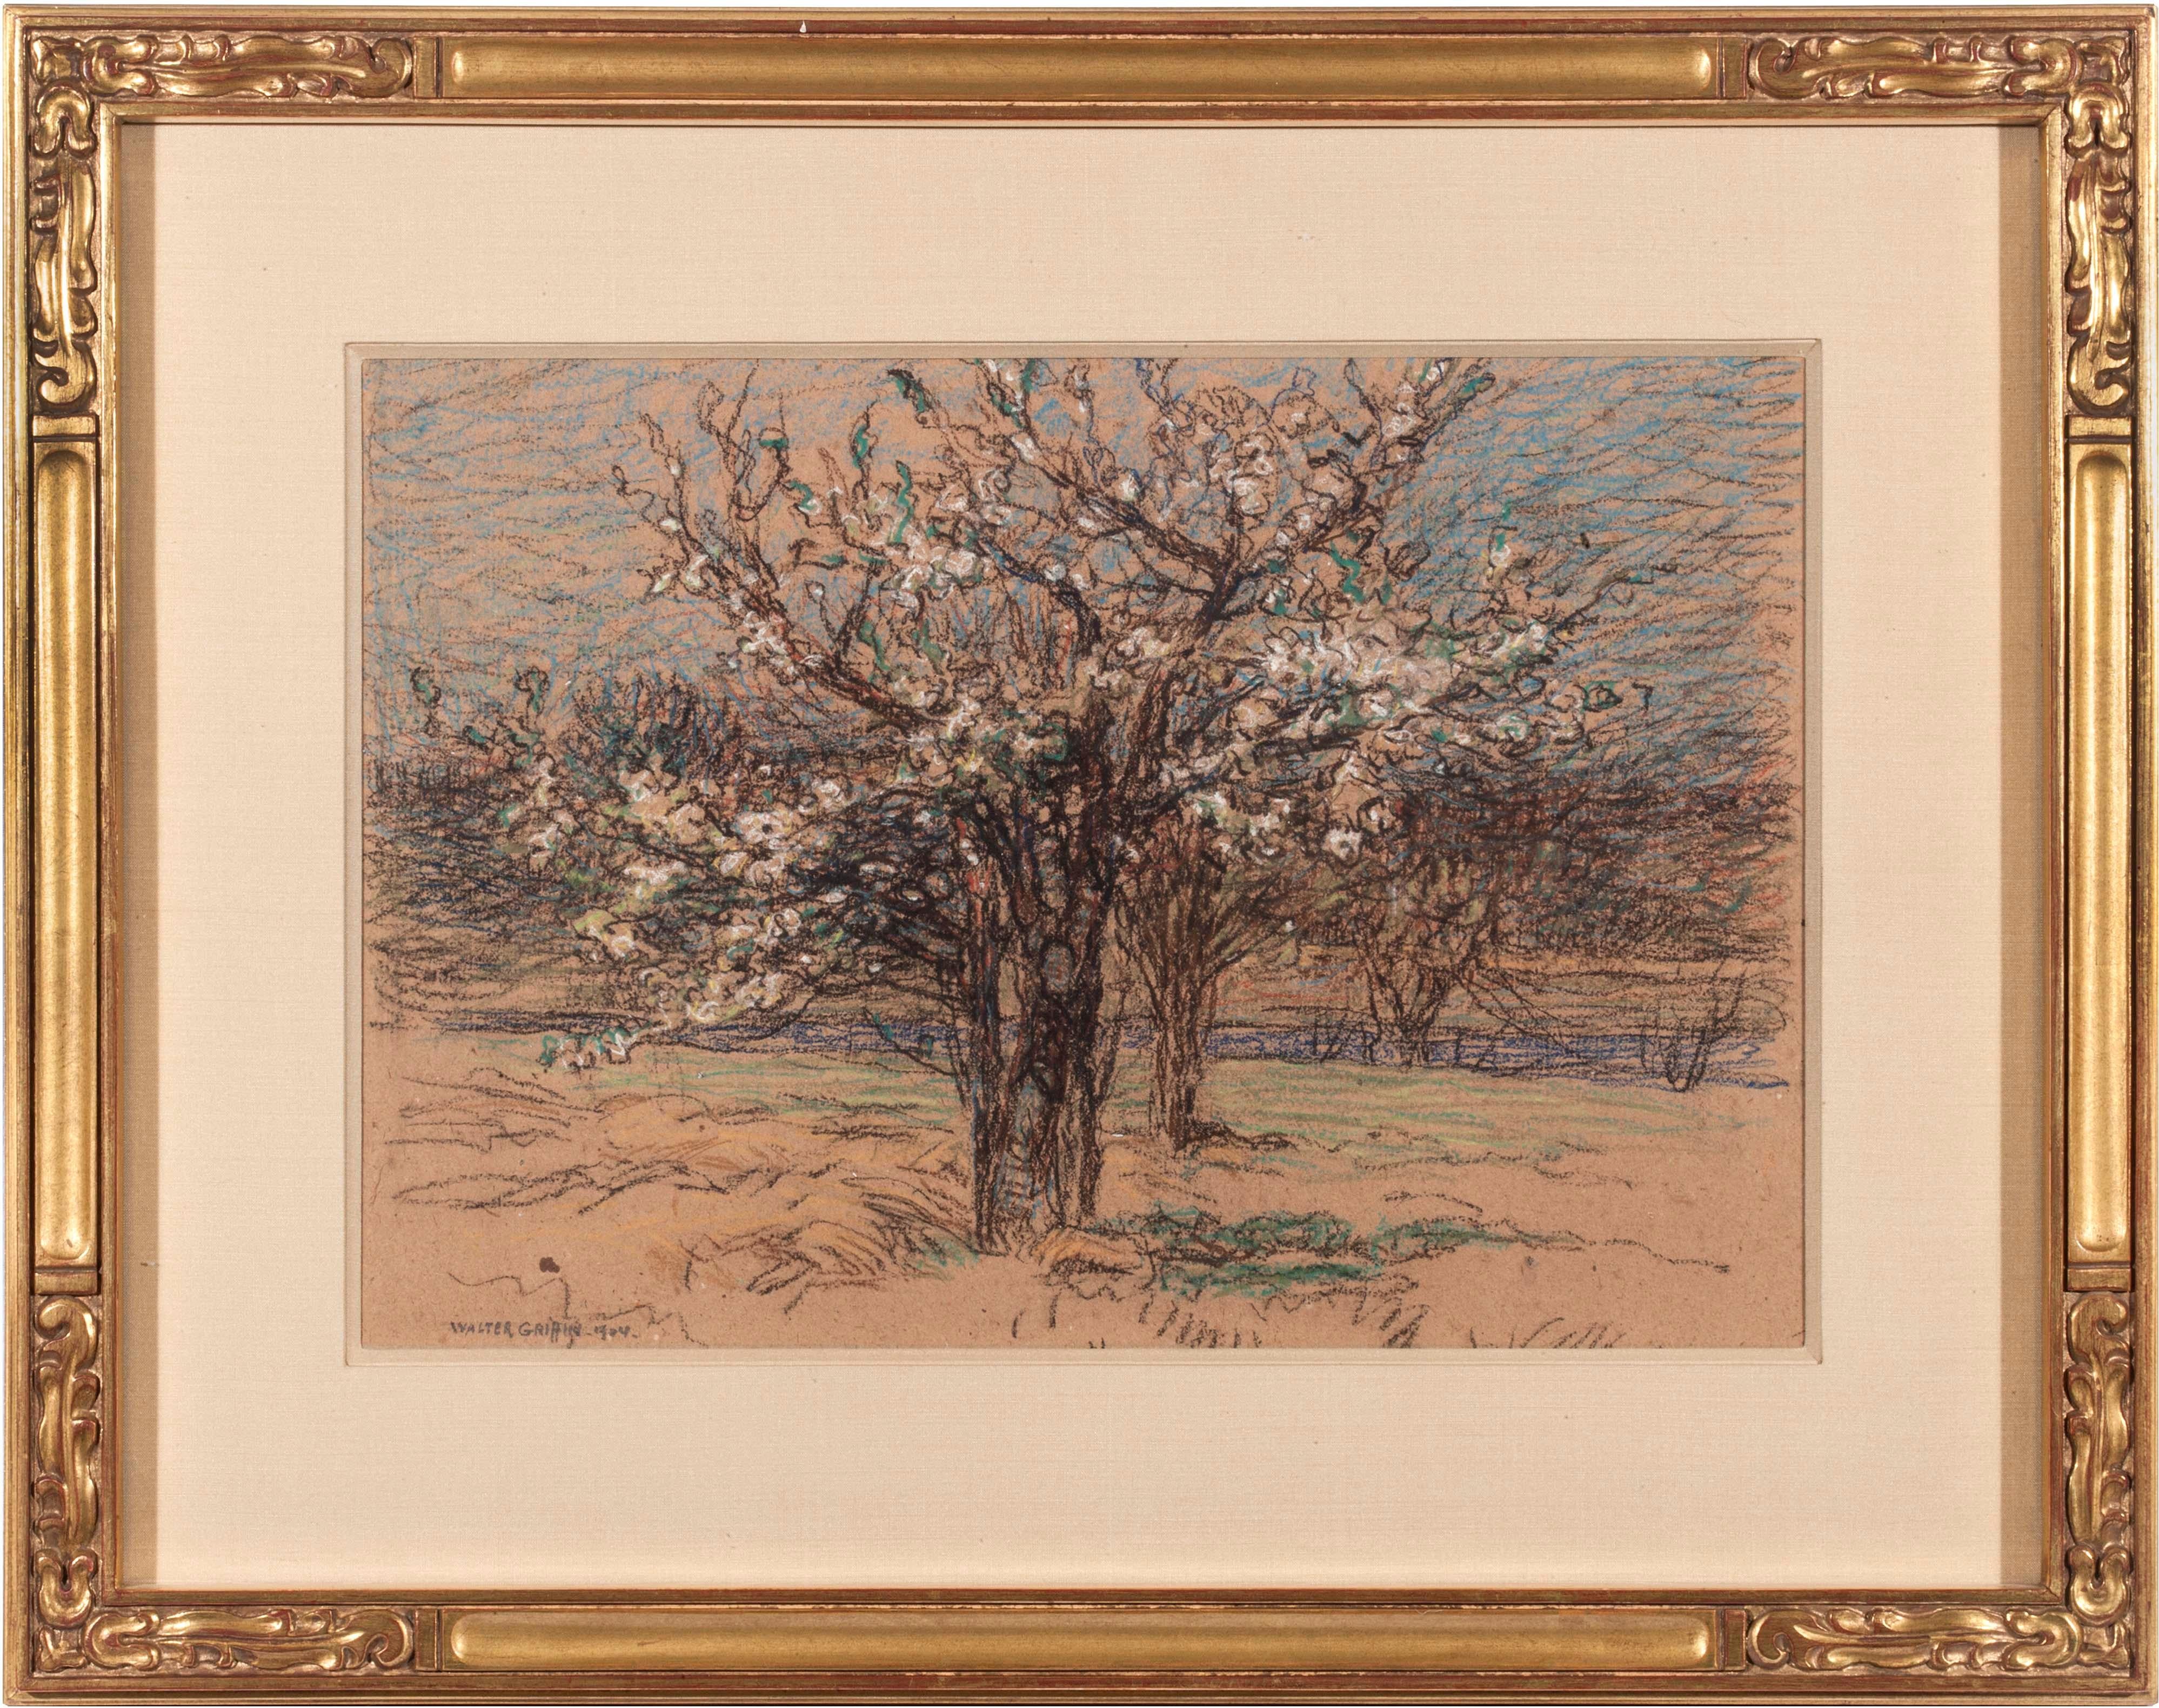 Orchard in Blossom, Landscape by Walter Griffin (1876-1937, American) For Sale 1